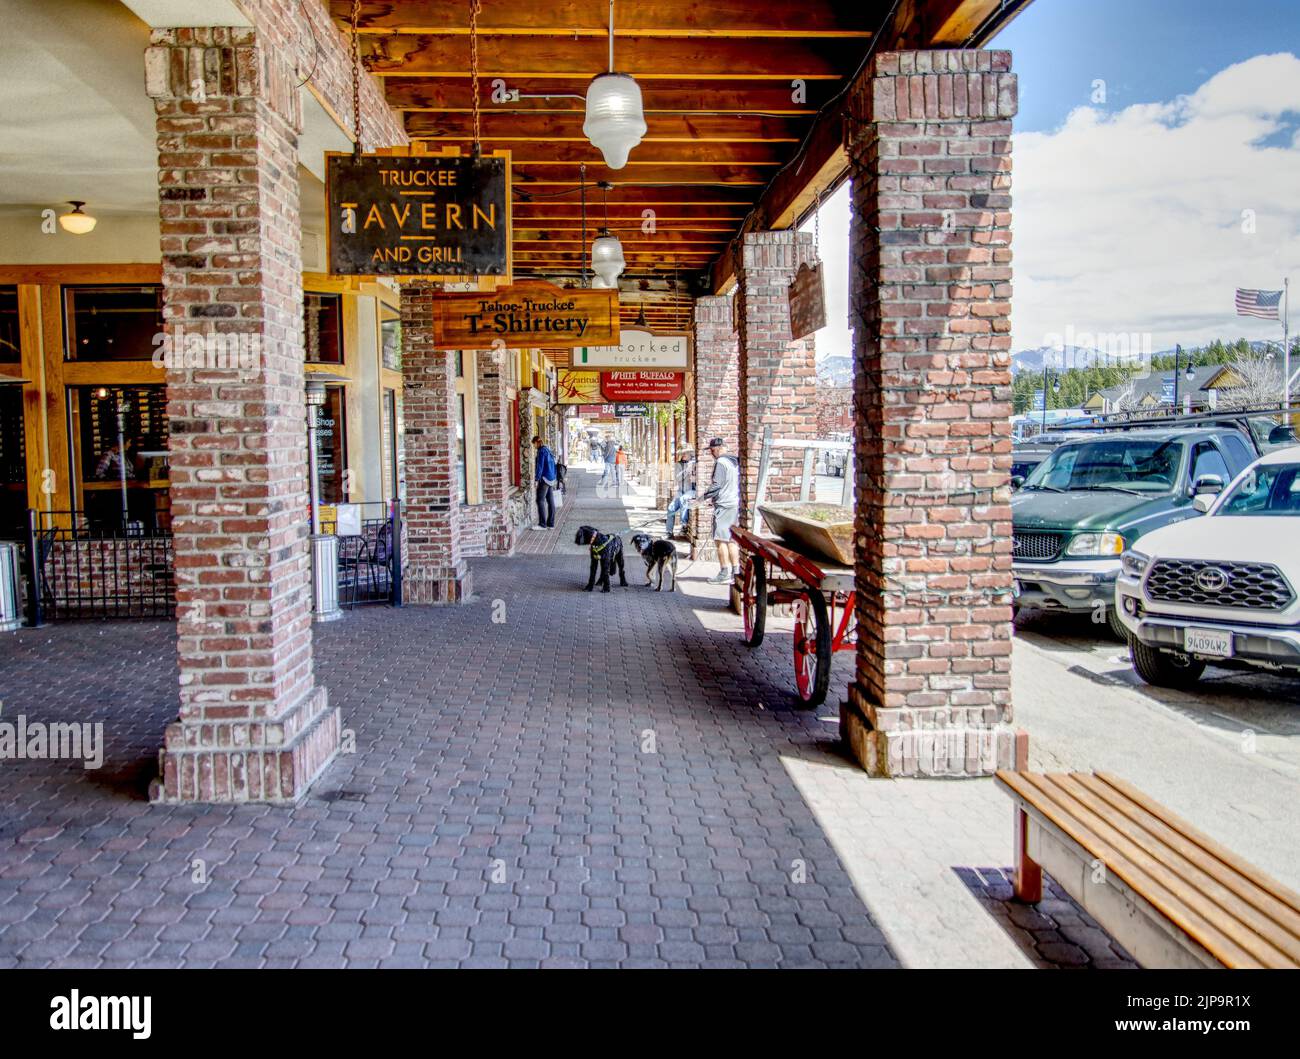 A crowdy street with brick columns, dogs, cars, benches, and a hanging tavern sign in Truckee, US Stock Photo